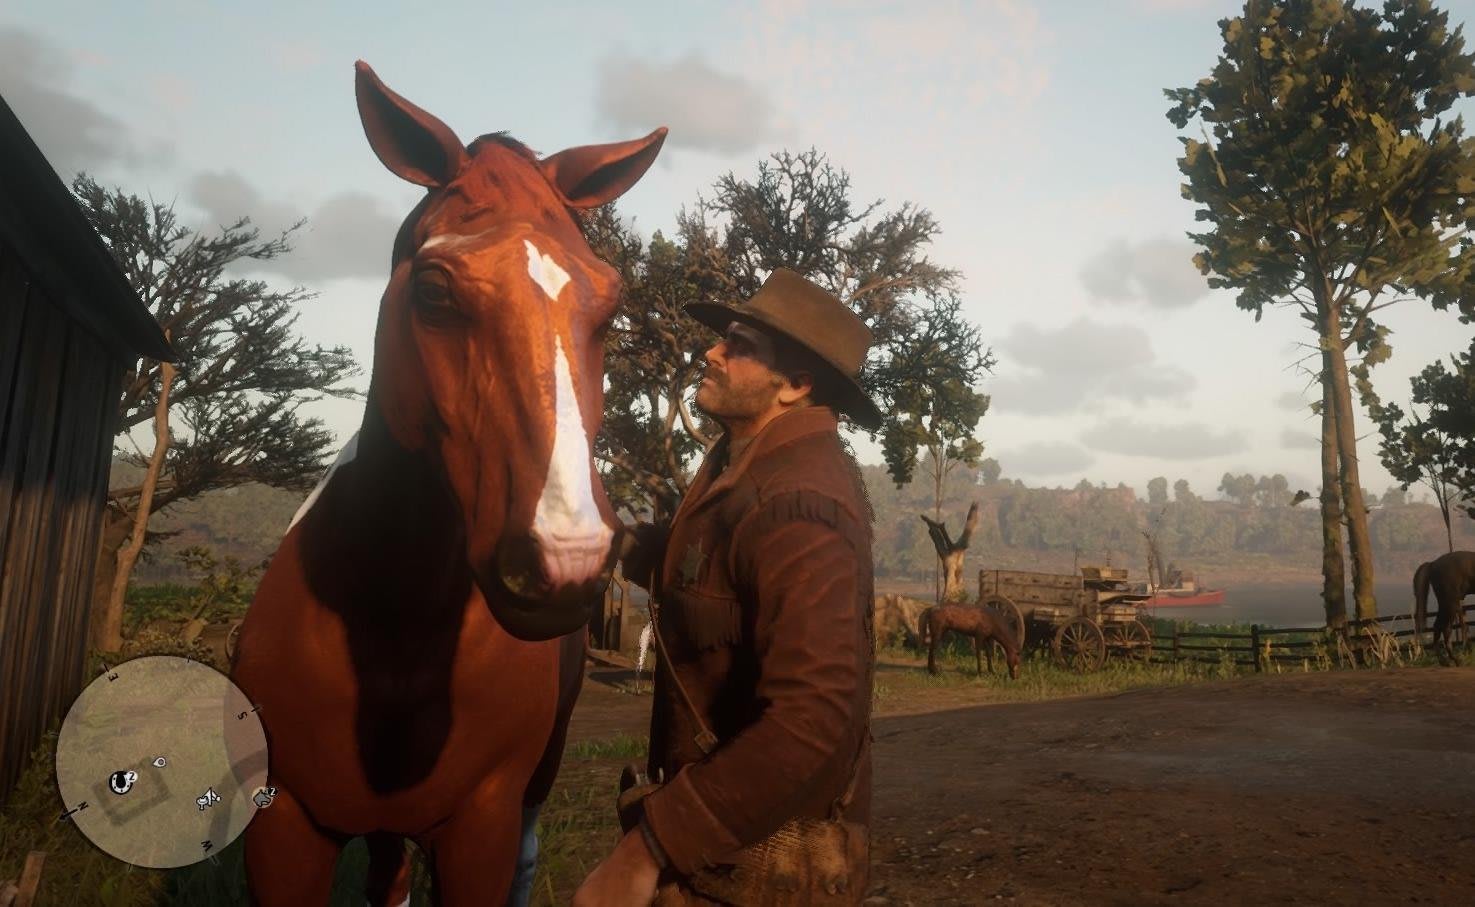 Red Dead Redemption 2 PC players get free stuff to make up for all the bugs